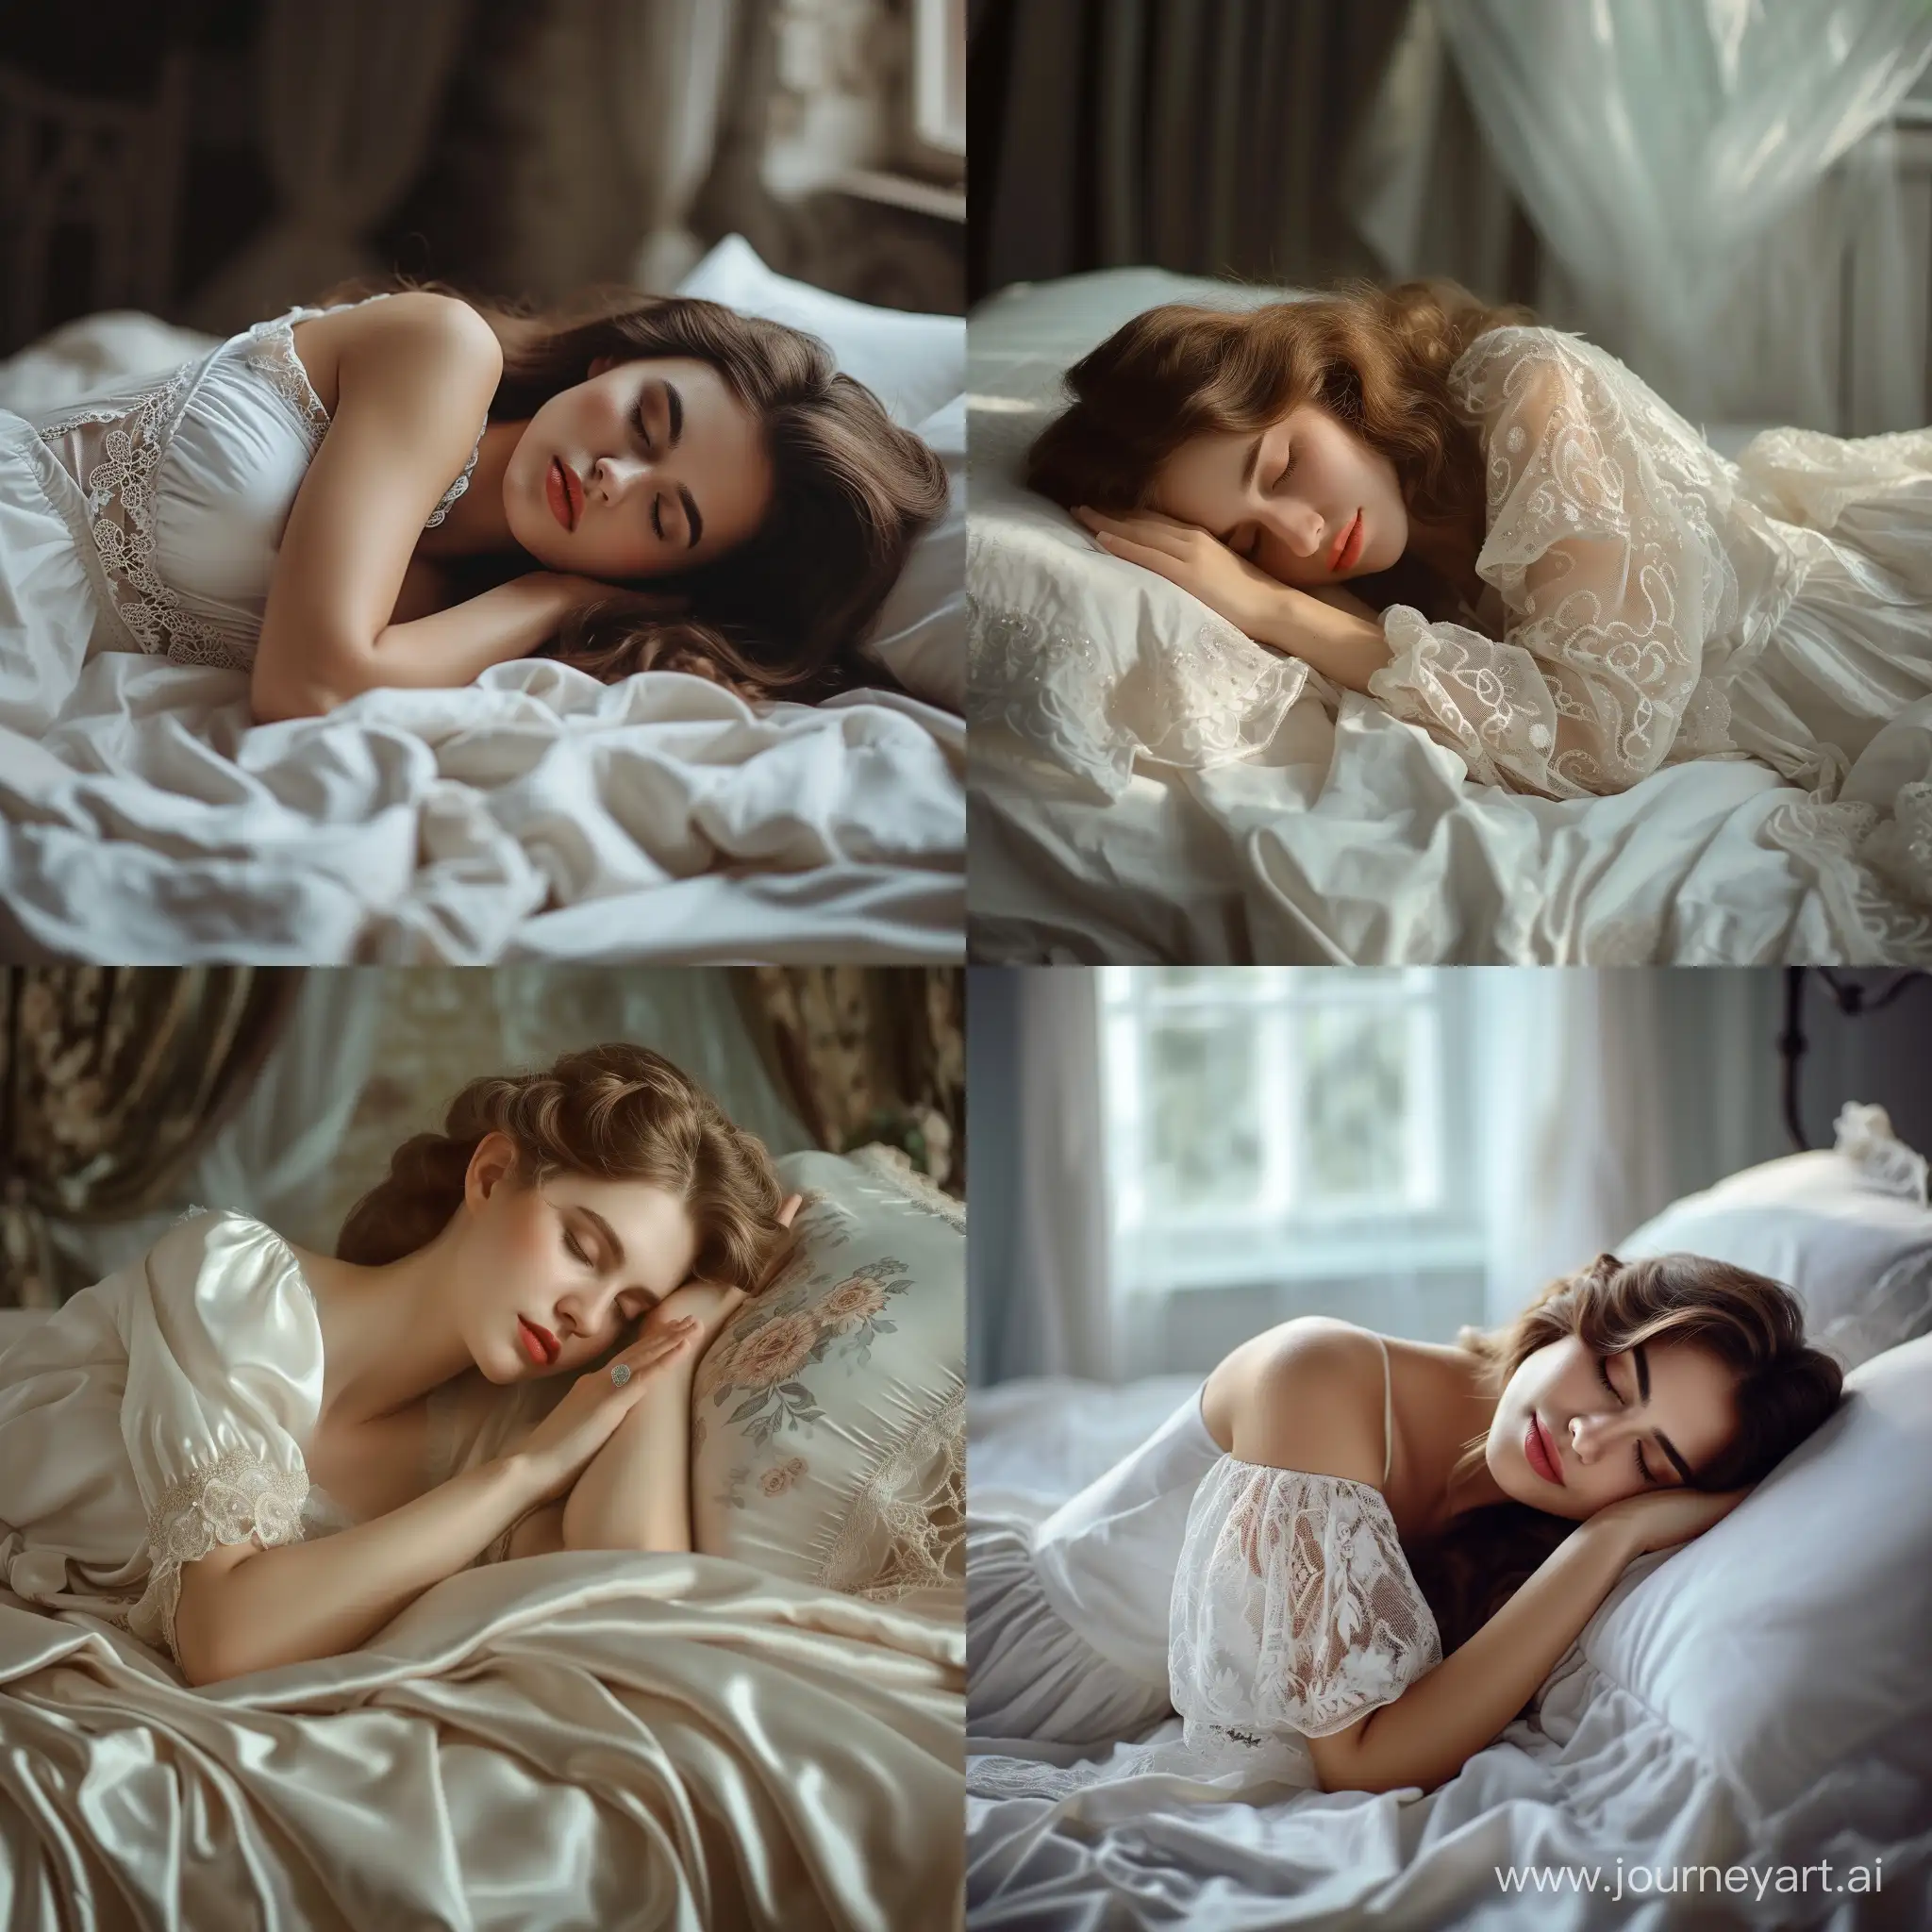 Serene-Beauty-in-Repose-Realistic-Photo-of-a-Woman-Sleeping-on-Bed